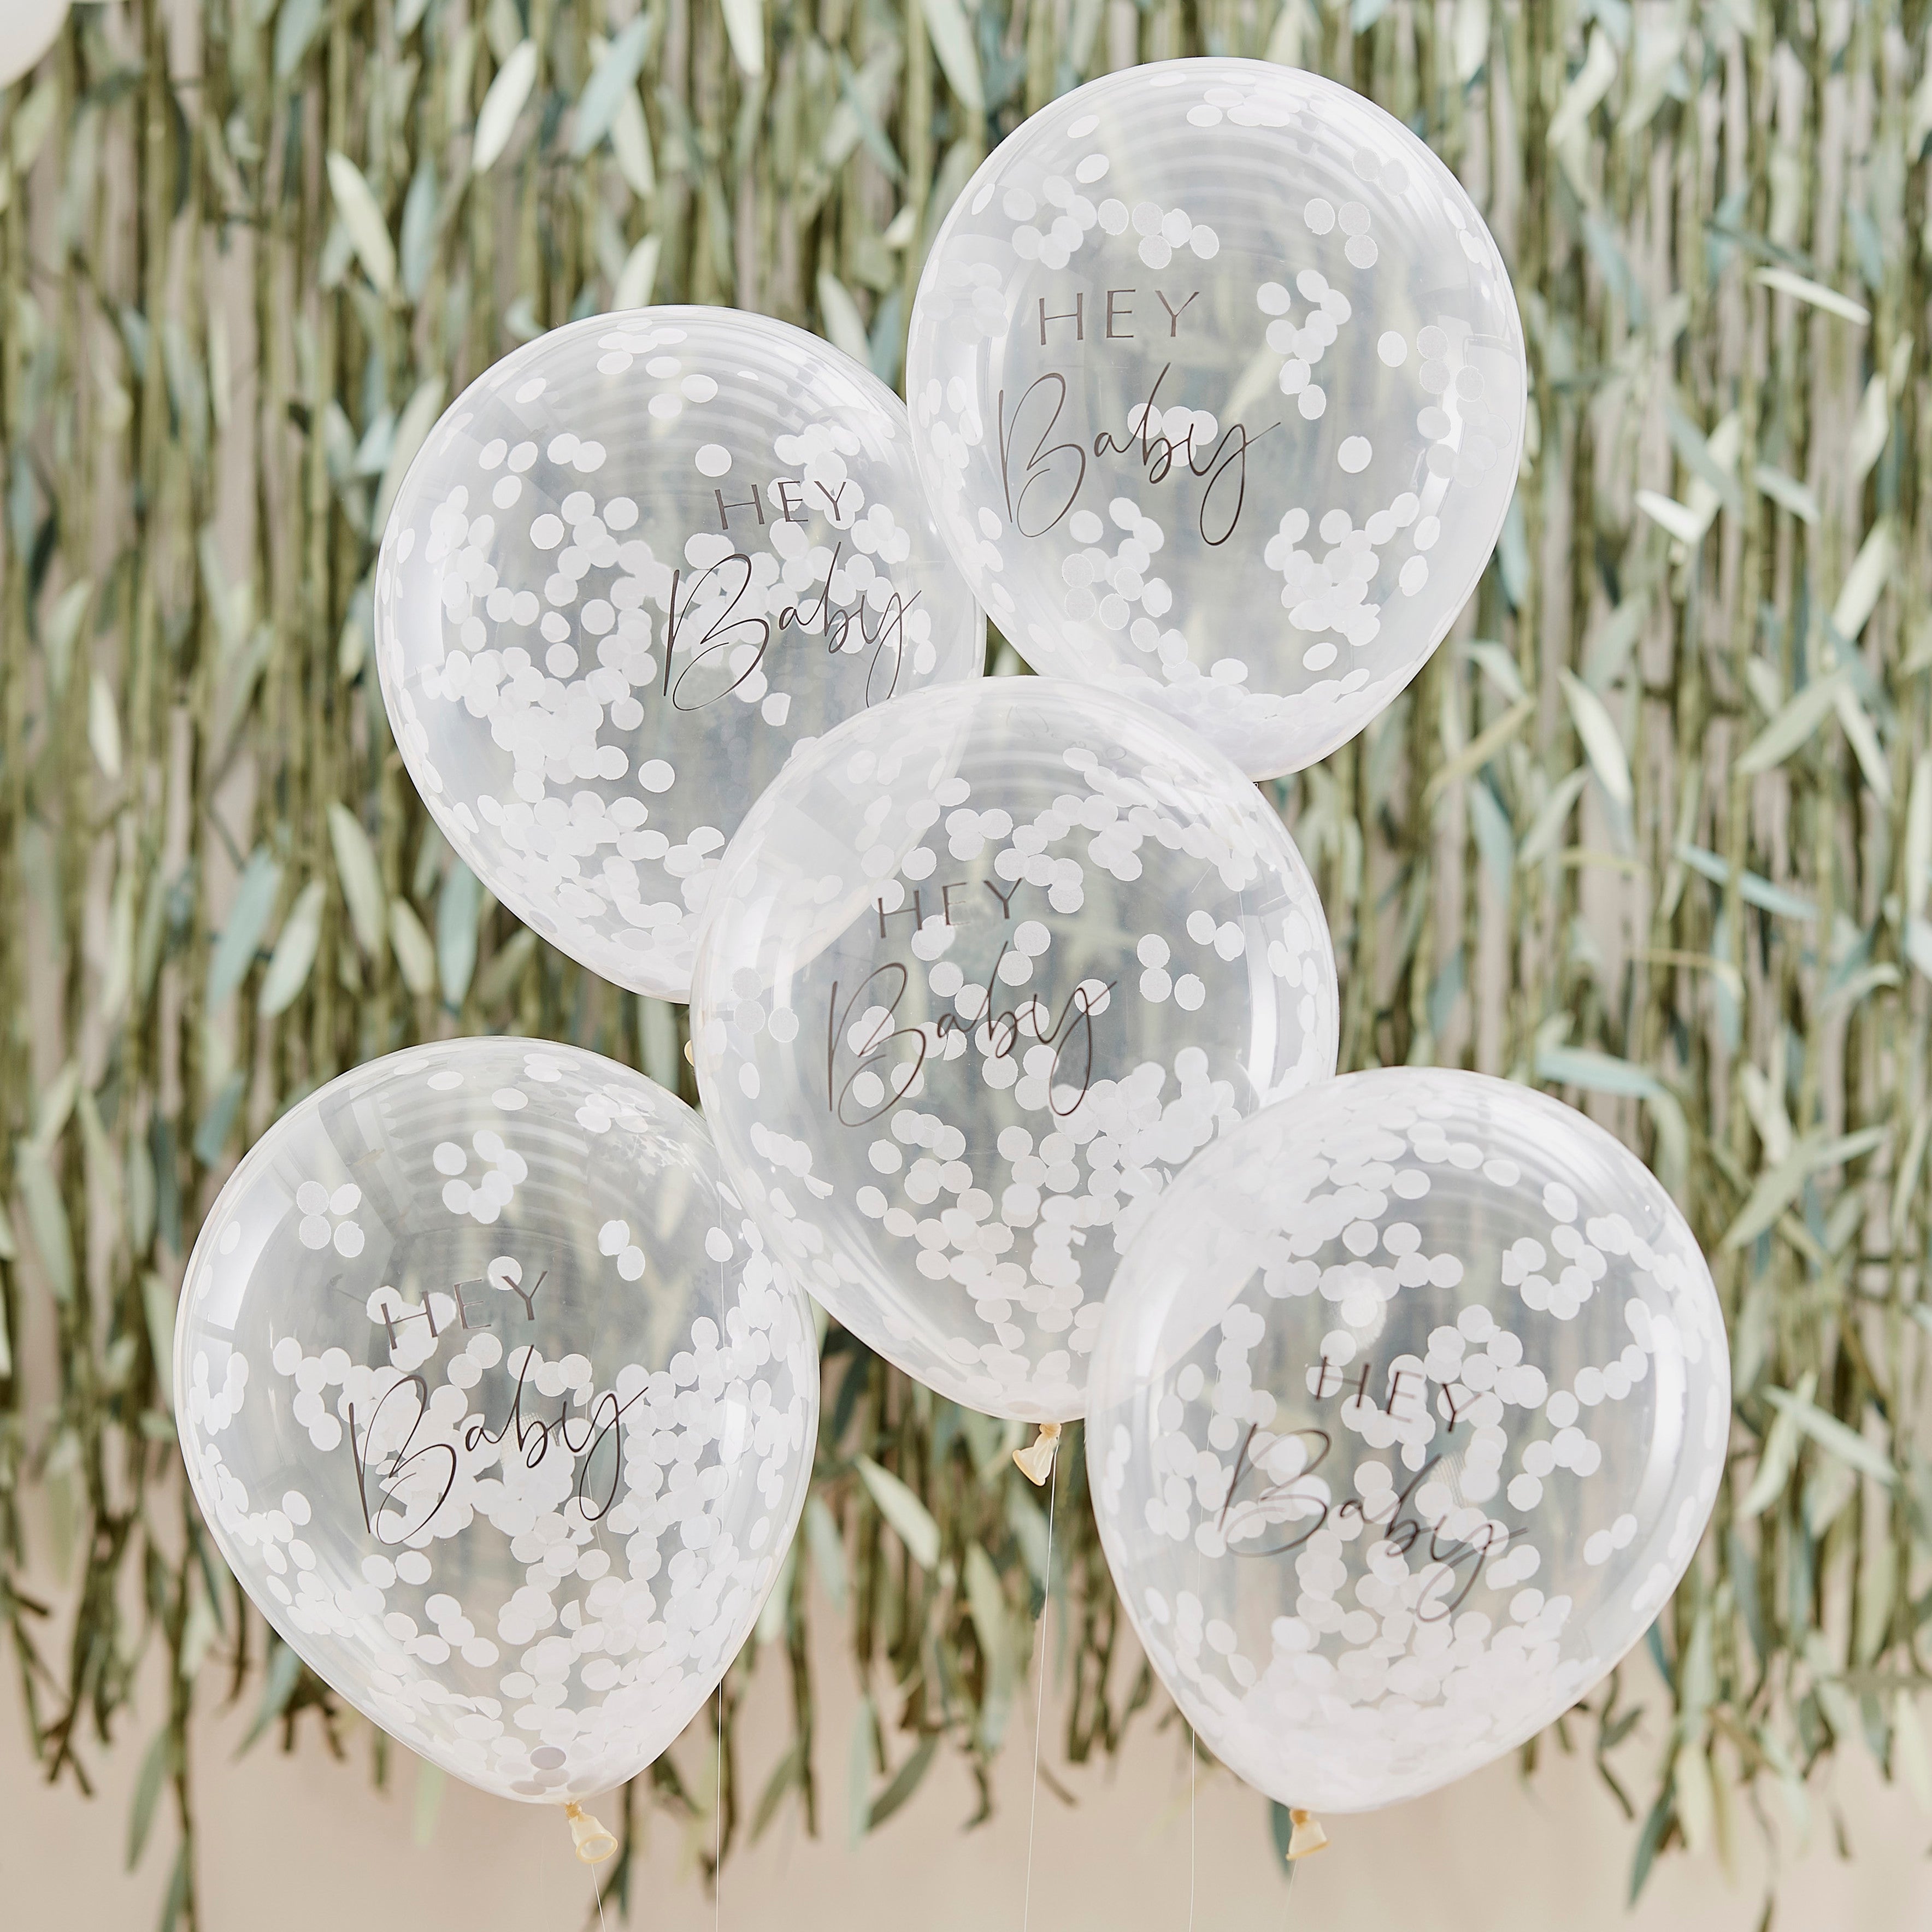 A bunch of latex balloons Hey Baby 5 pcs